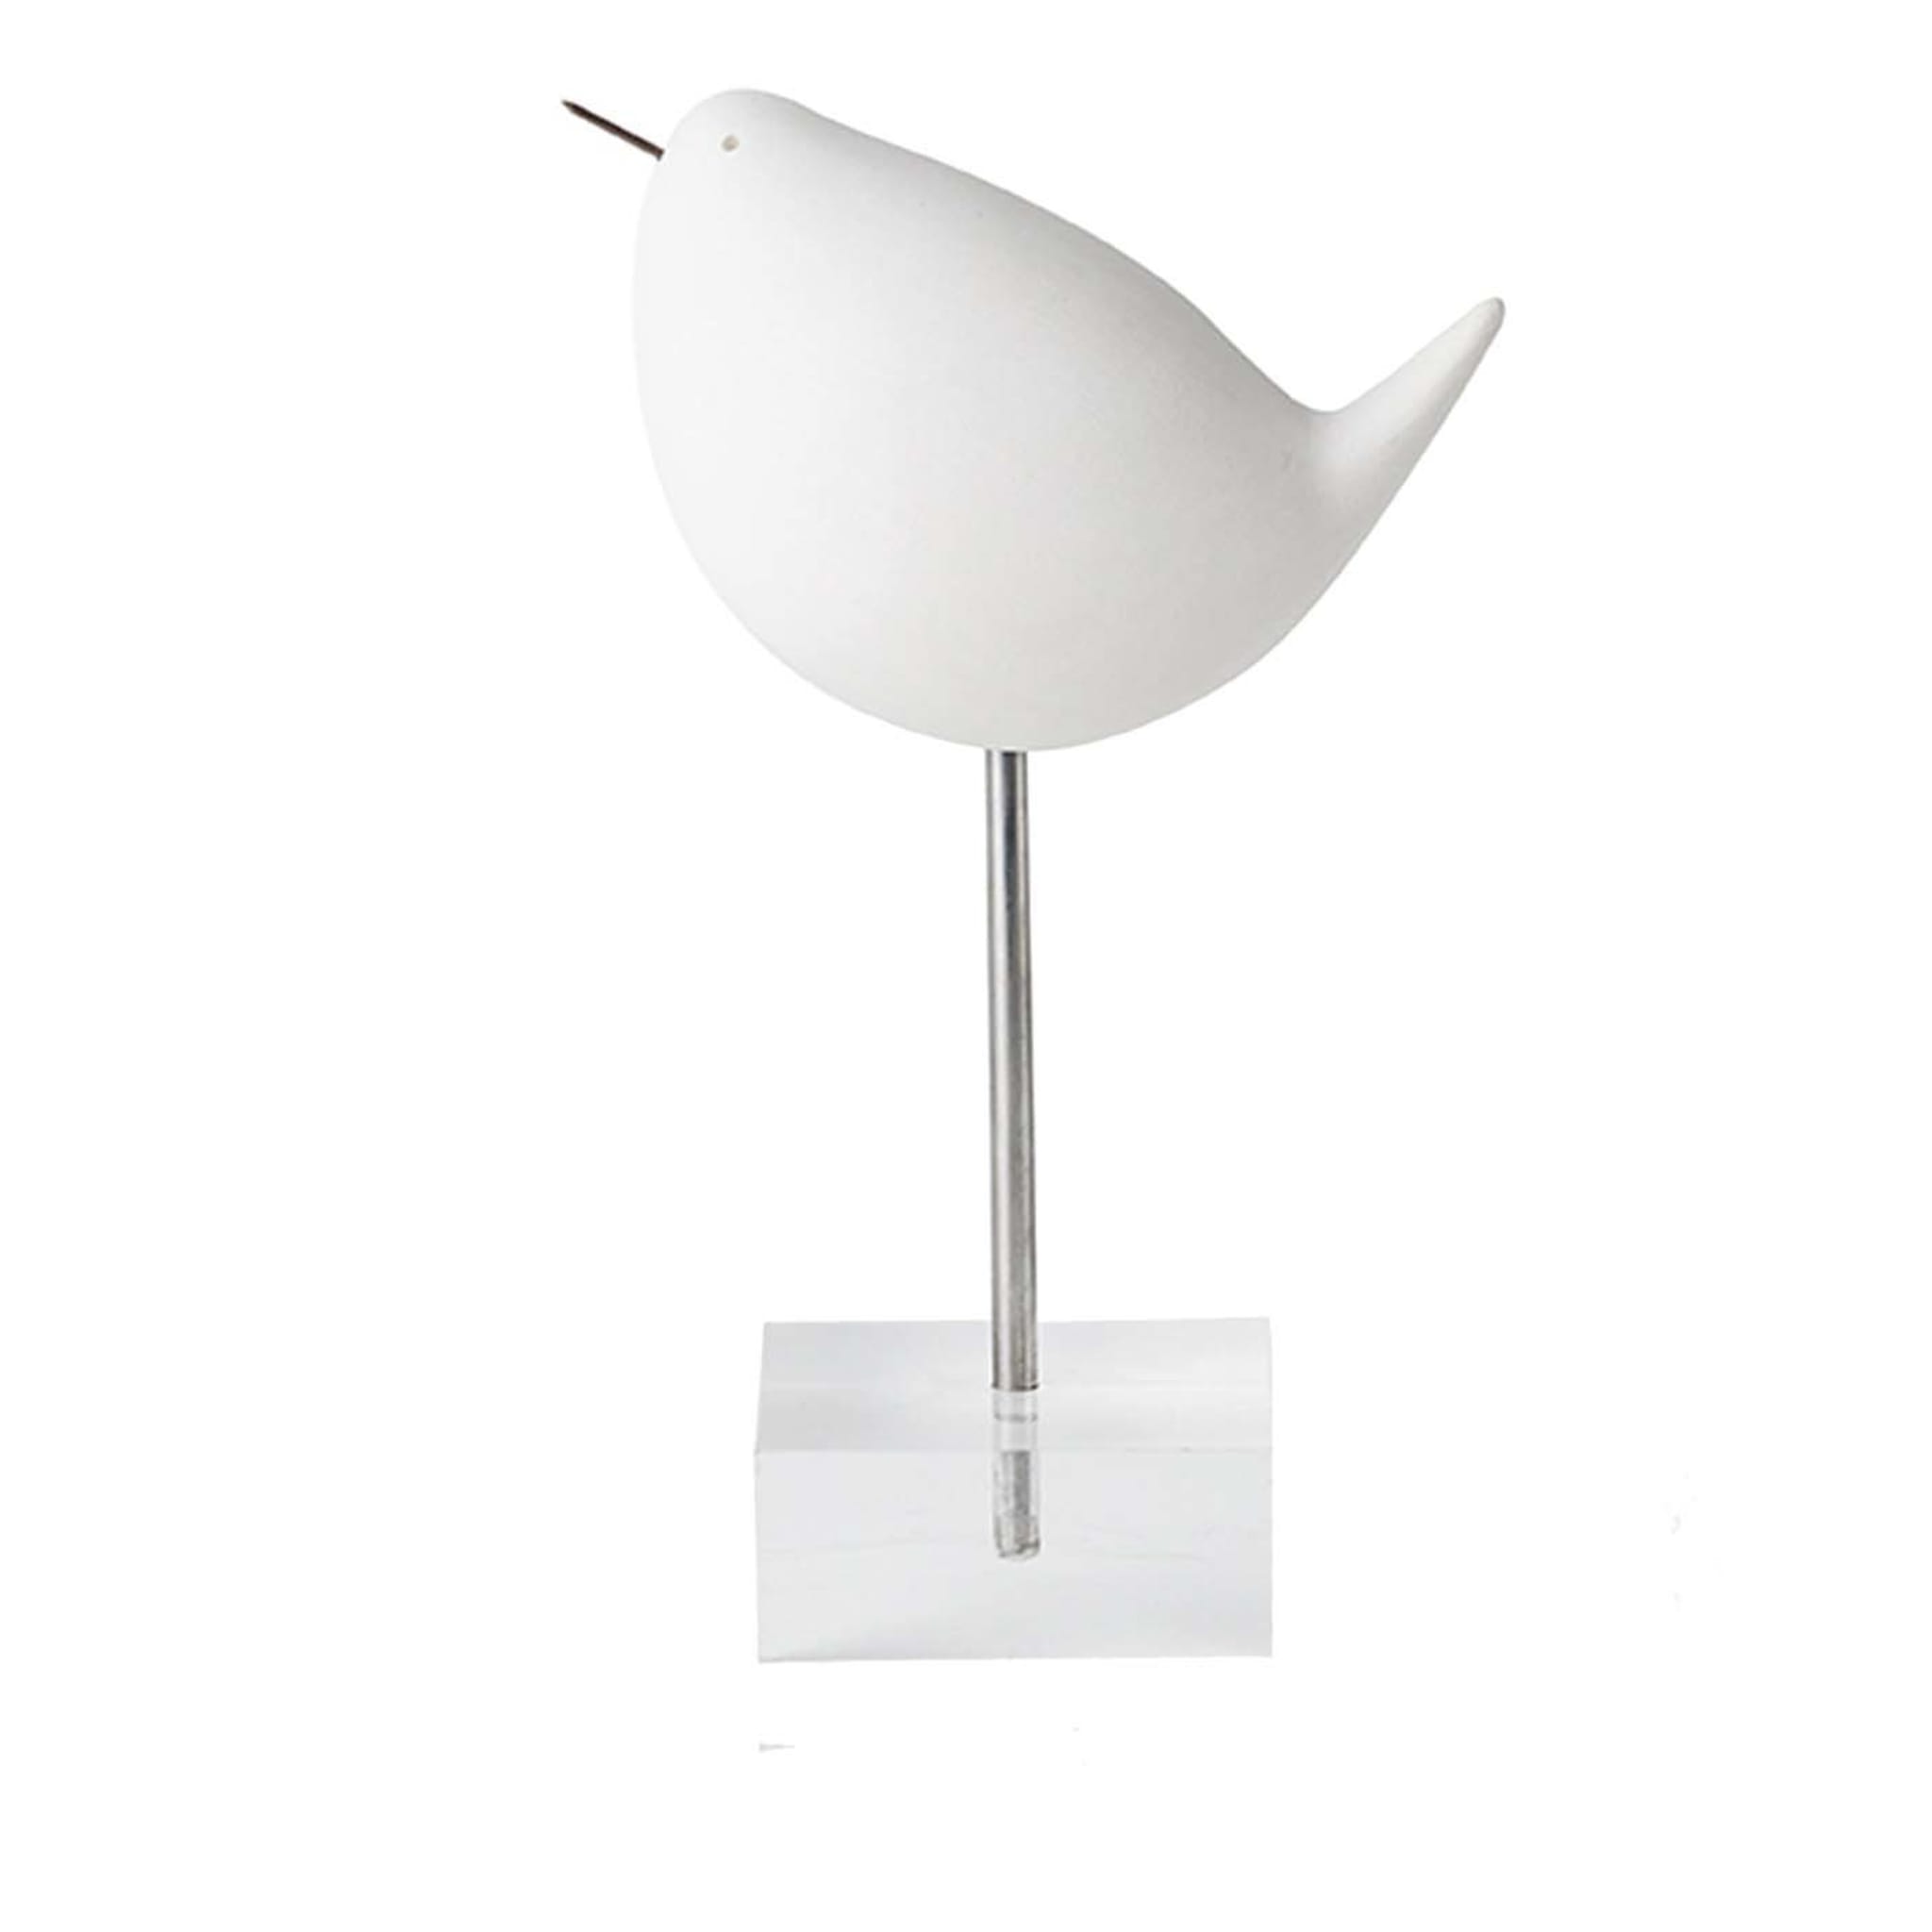 White Bird on a Stand by Aldo Londi #2 - Main view